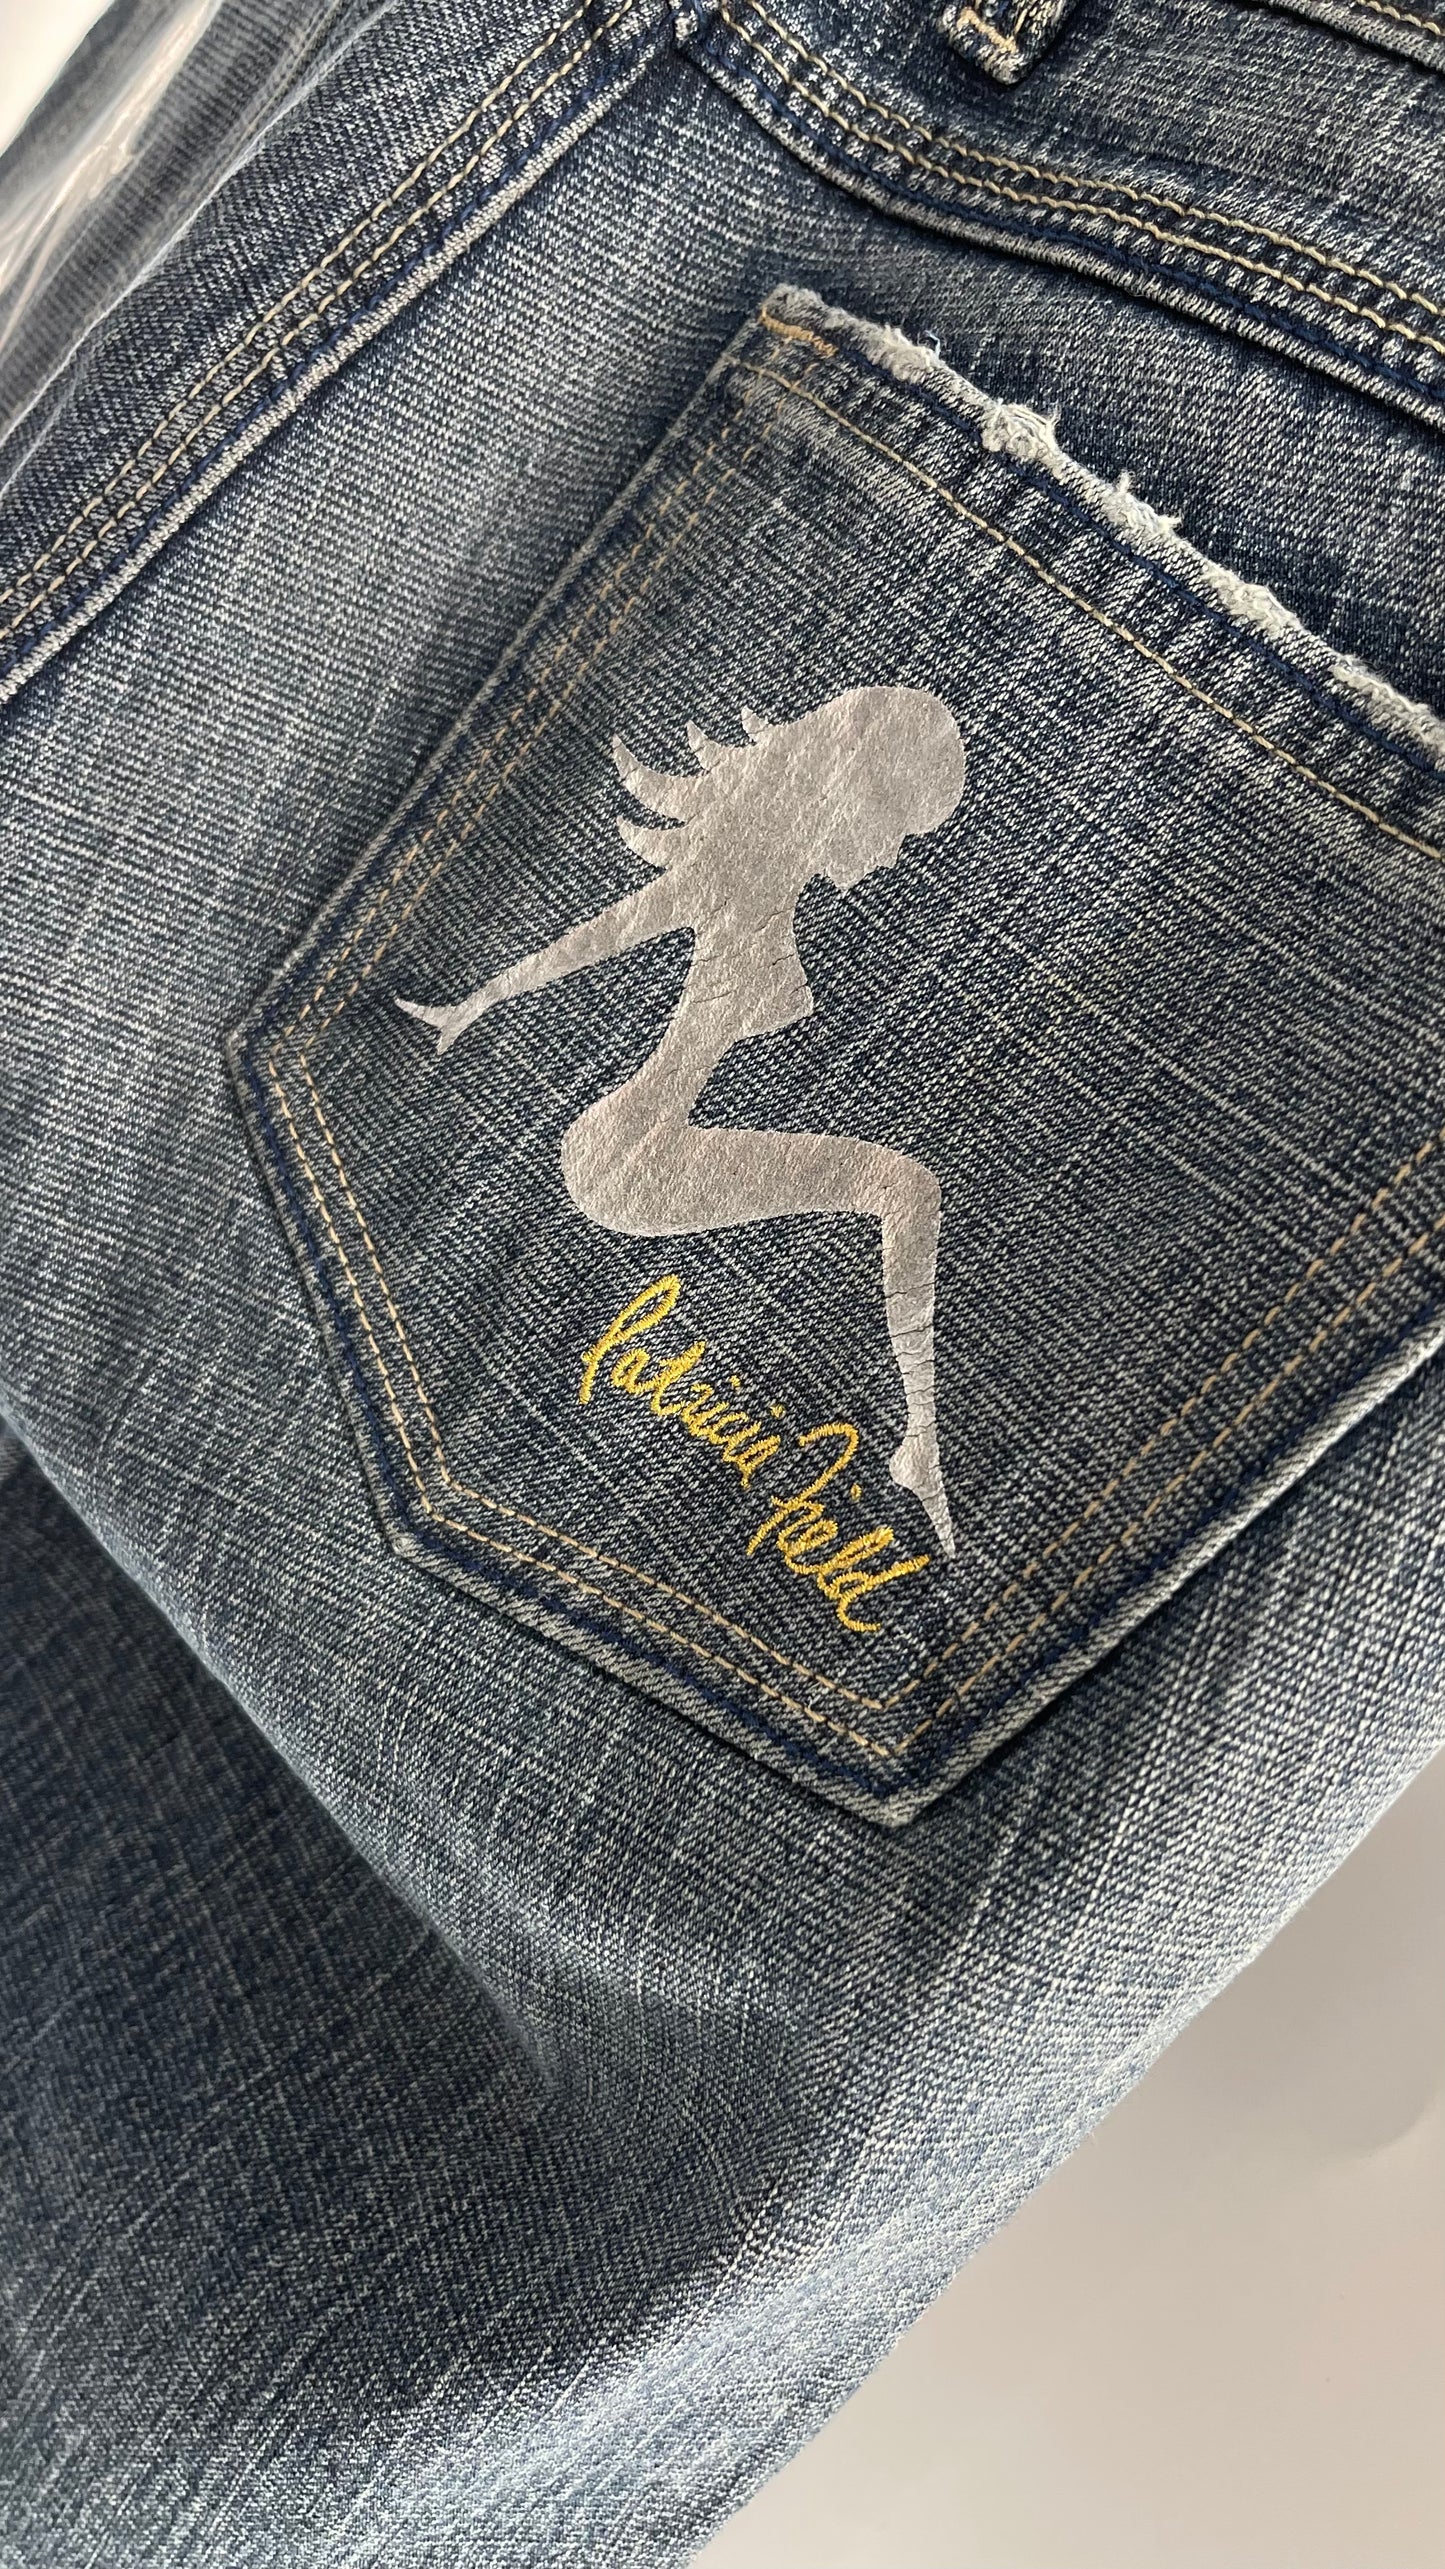 Vintage Smart AS JEANS Light Wash with Silver Metallic Female Posing Silhouette and Paulina Field Embroidery (28)